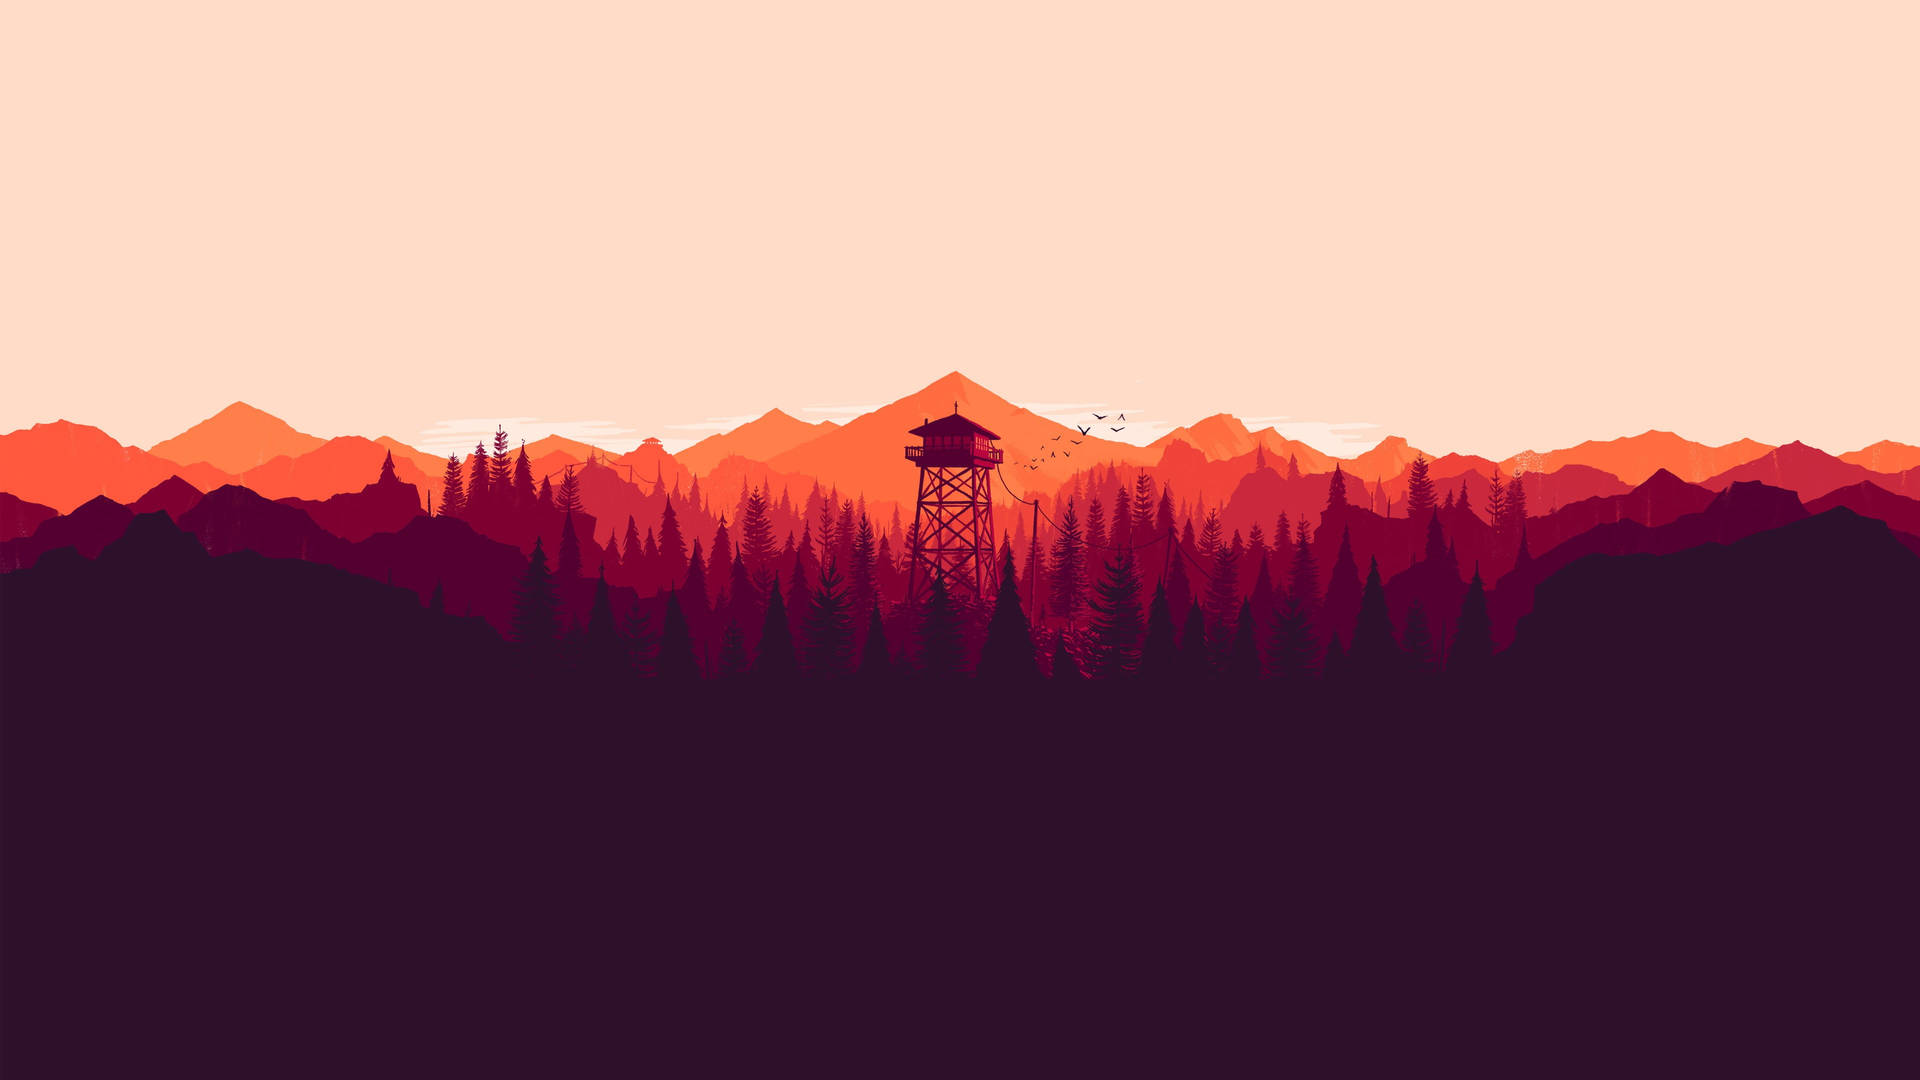 Red Mountain Tower